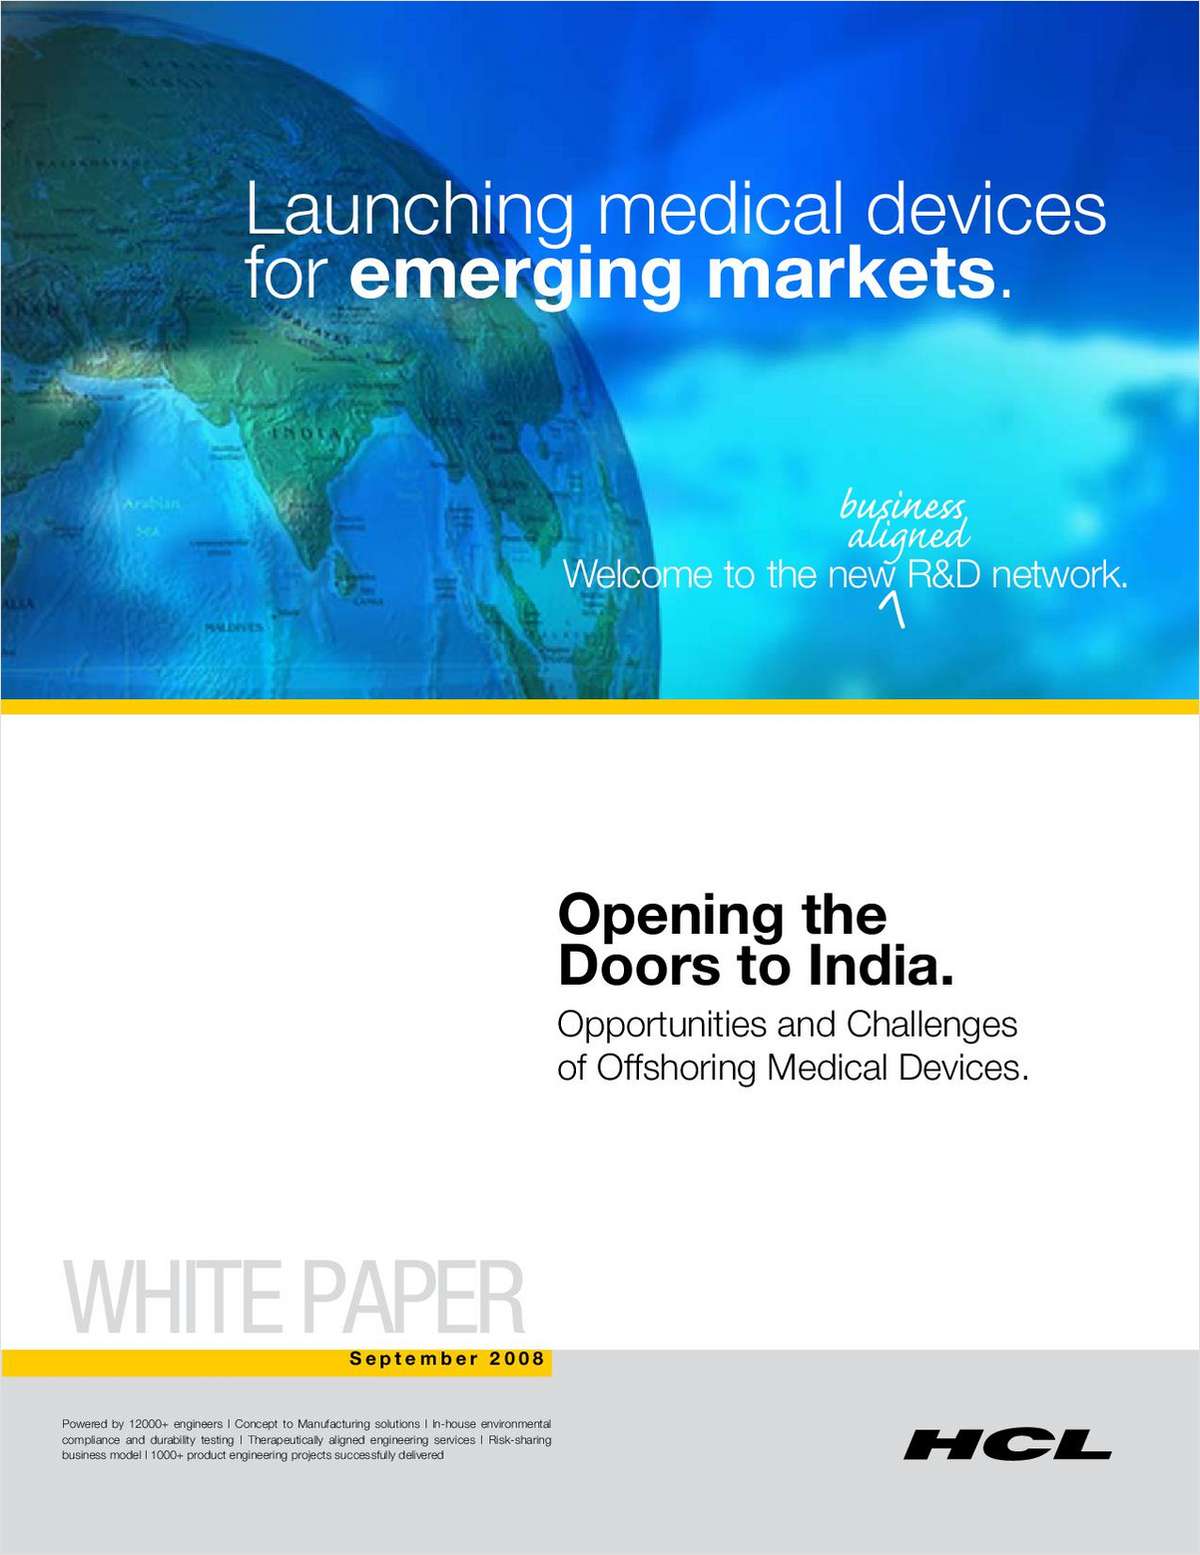 Opening the Doors to India: Opportunities and Challenges of Offshoring Medical Devices